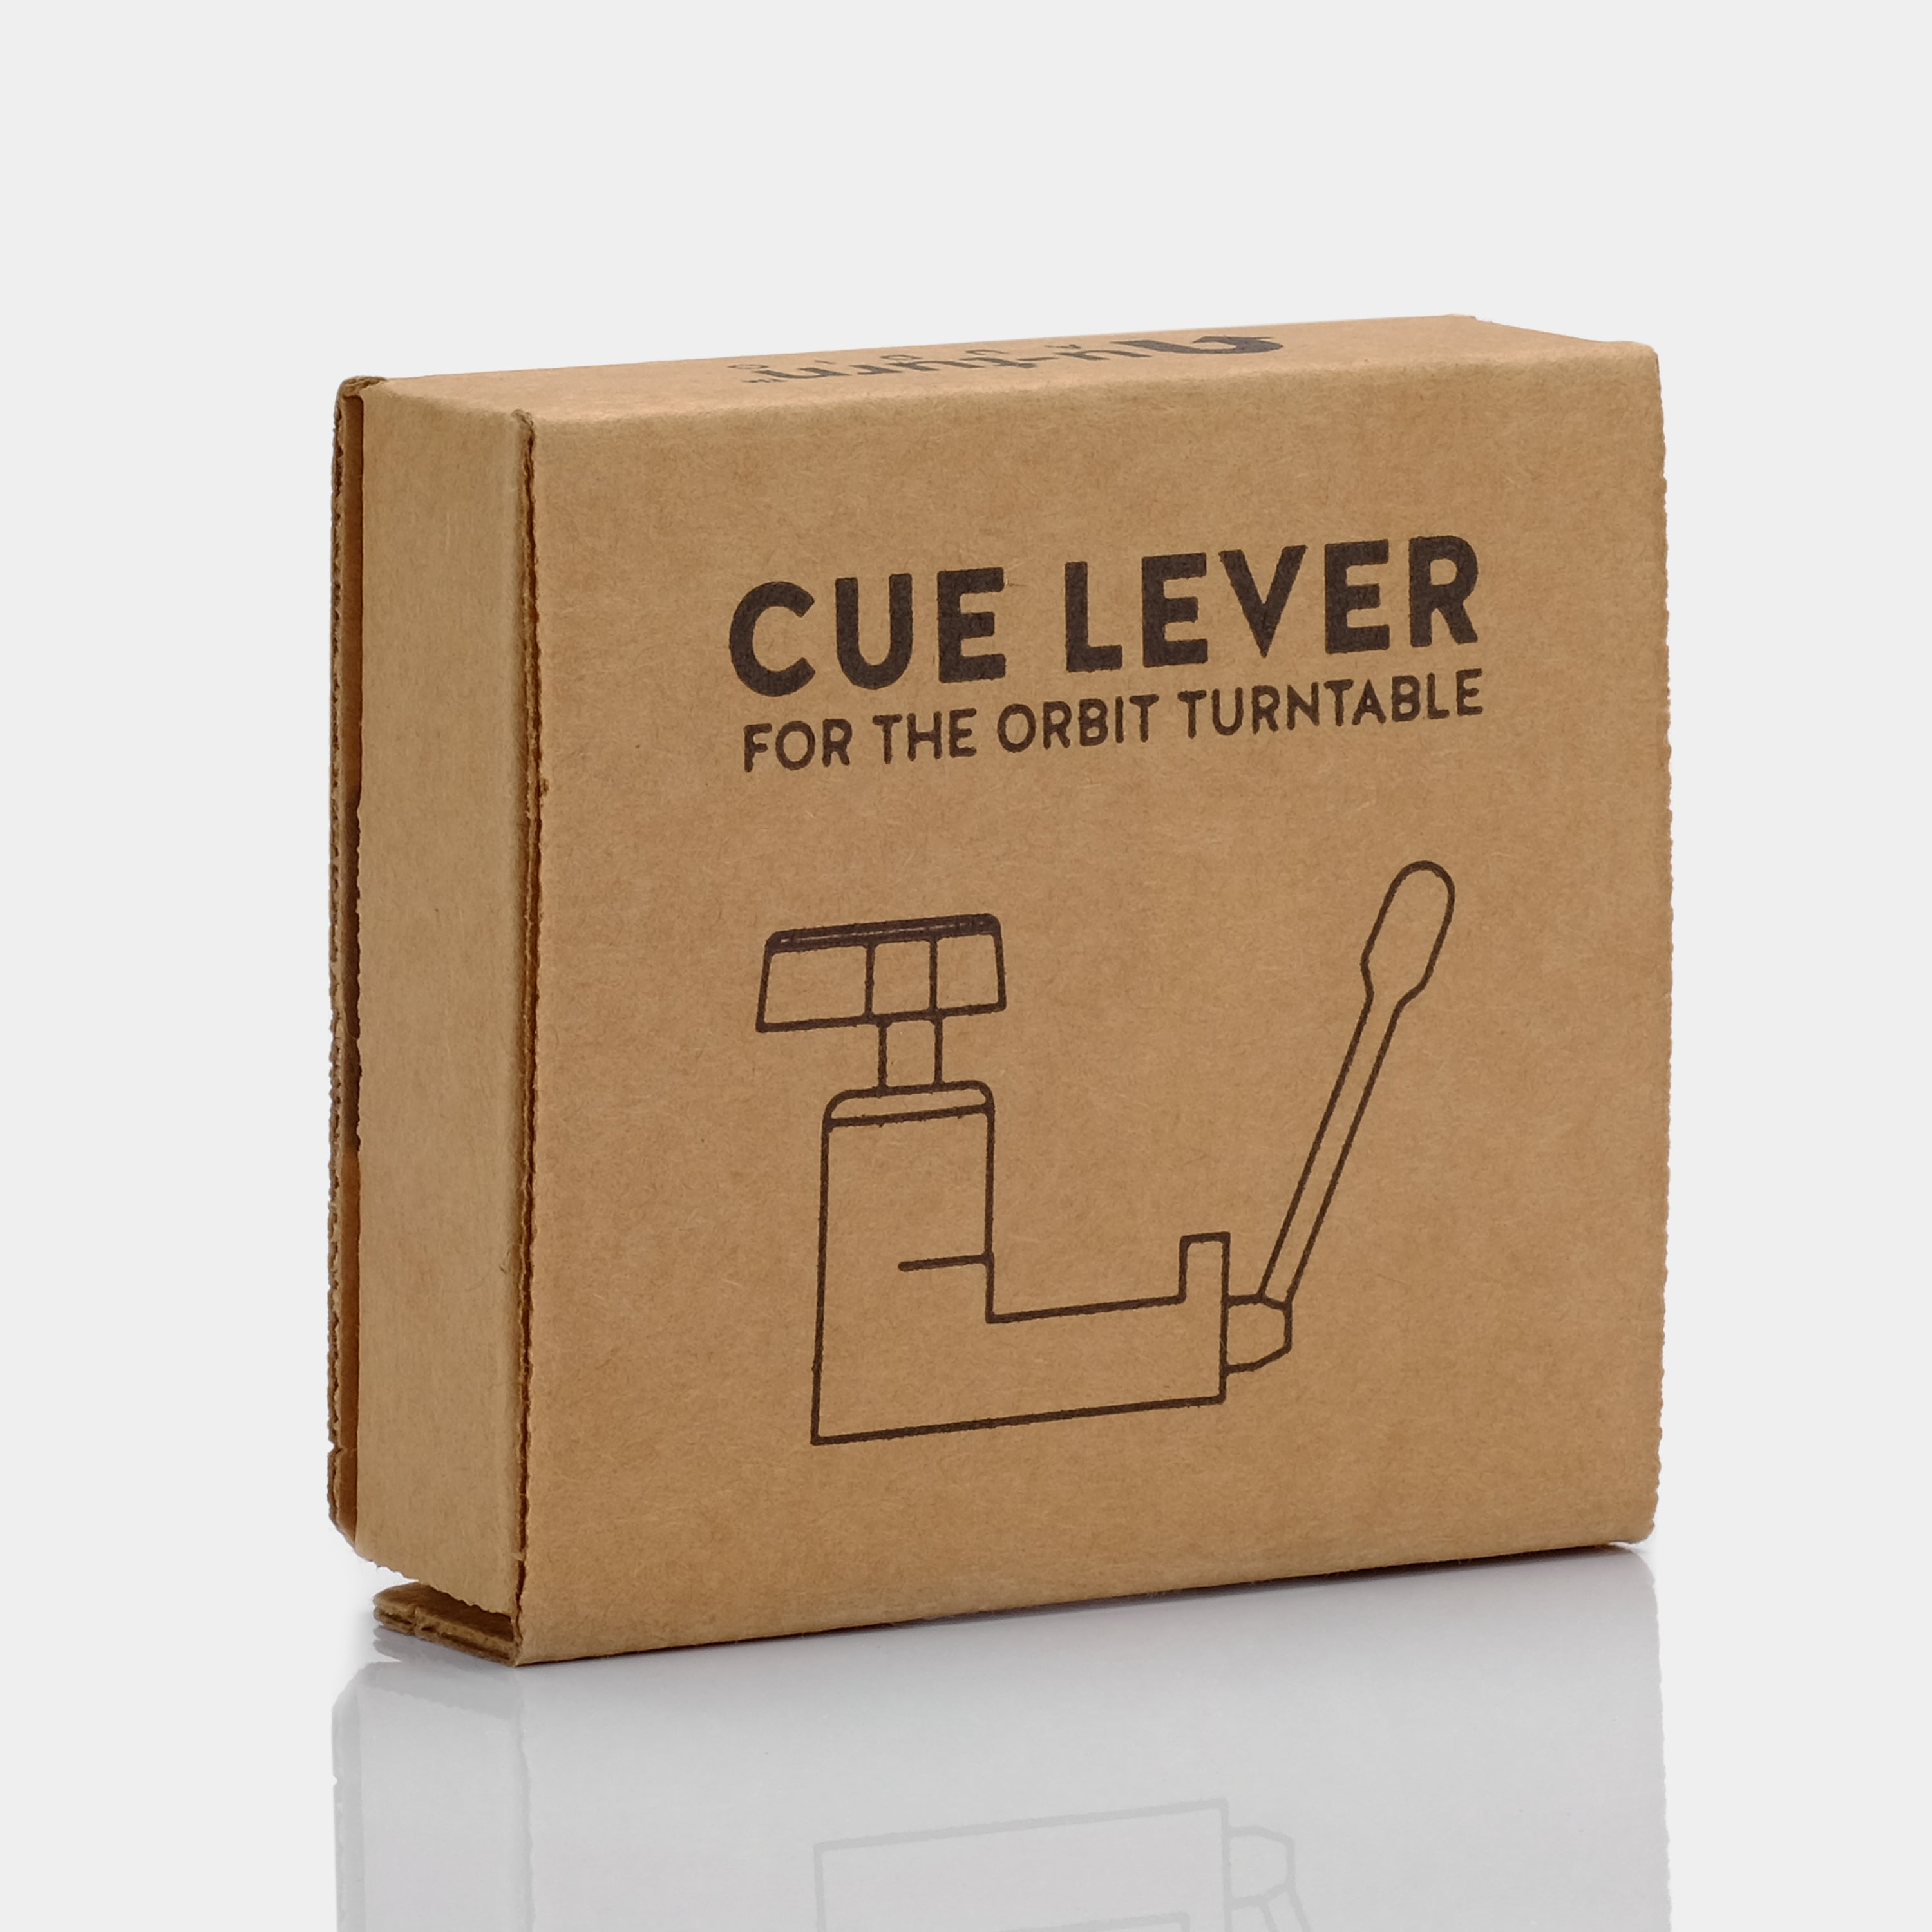 Cue Lever for Orbit Turntables by U-Turn Audio